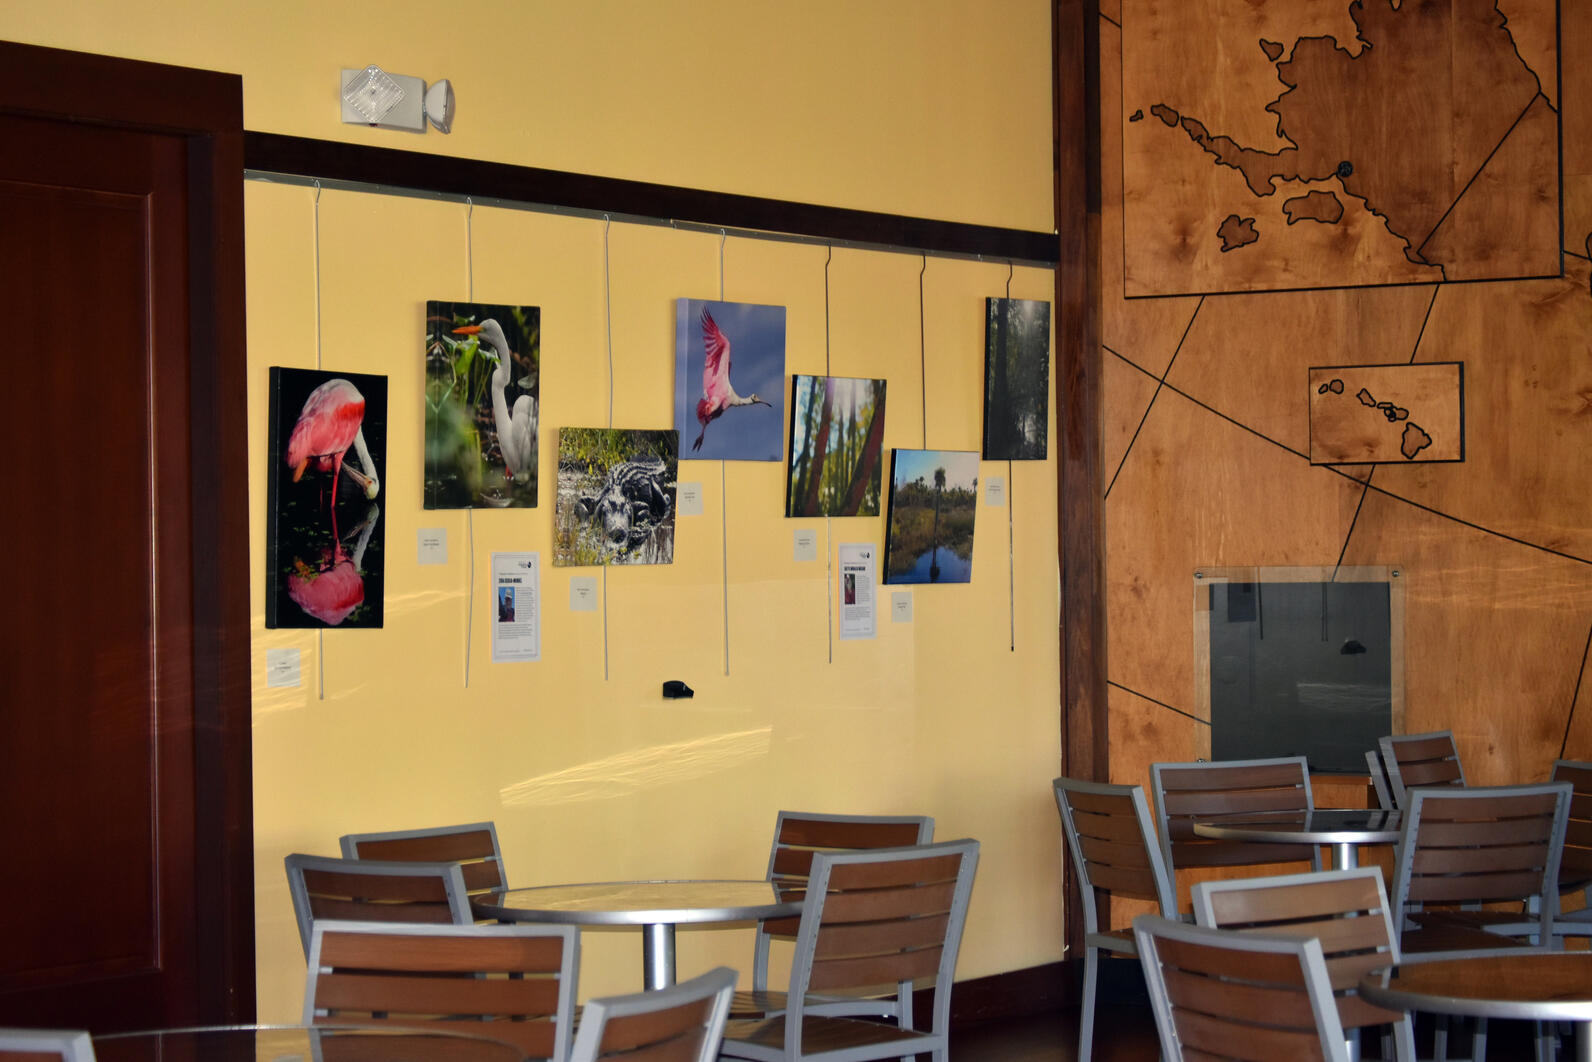 Photos mounted on the wall in the cafe